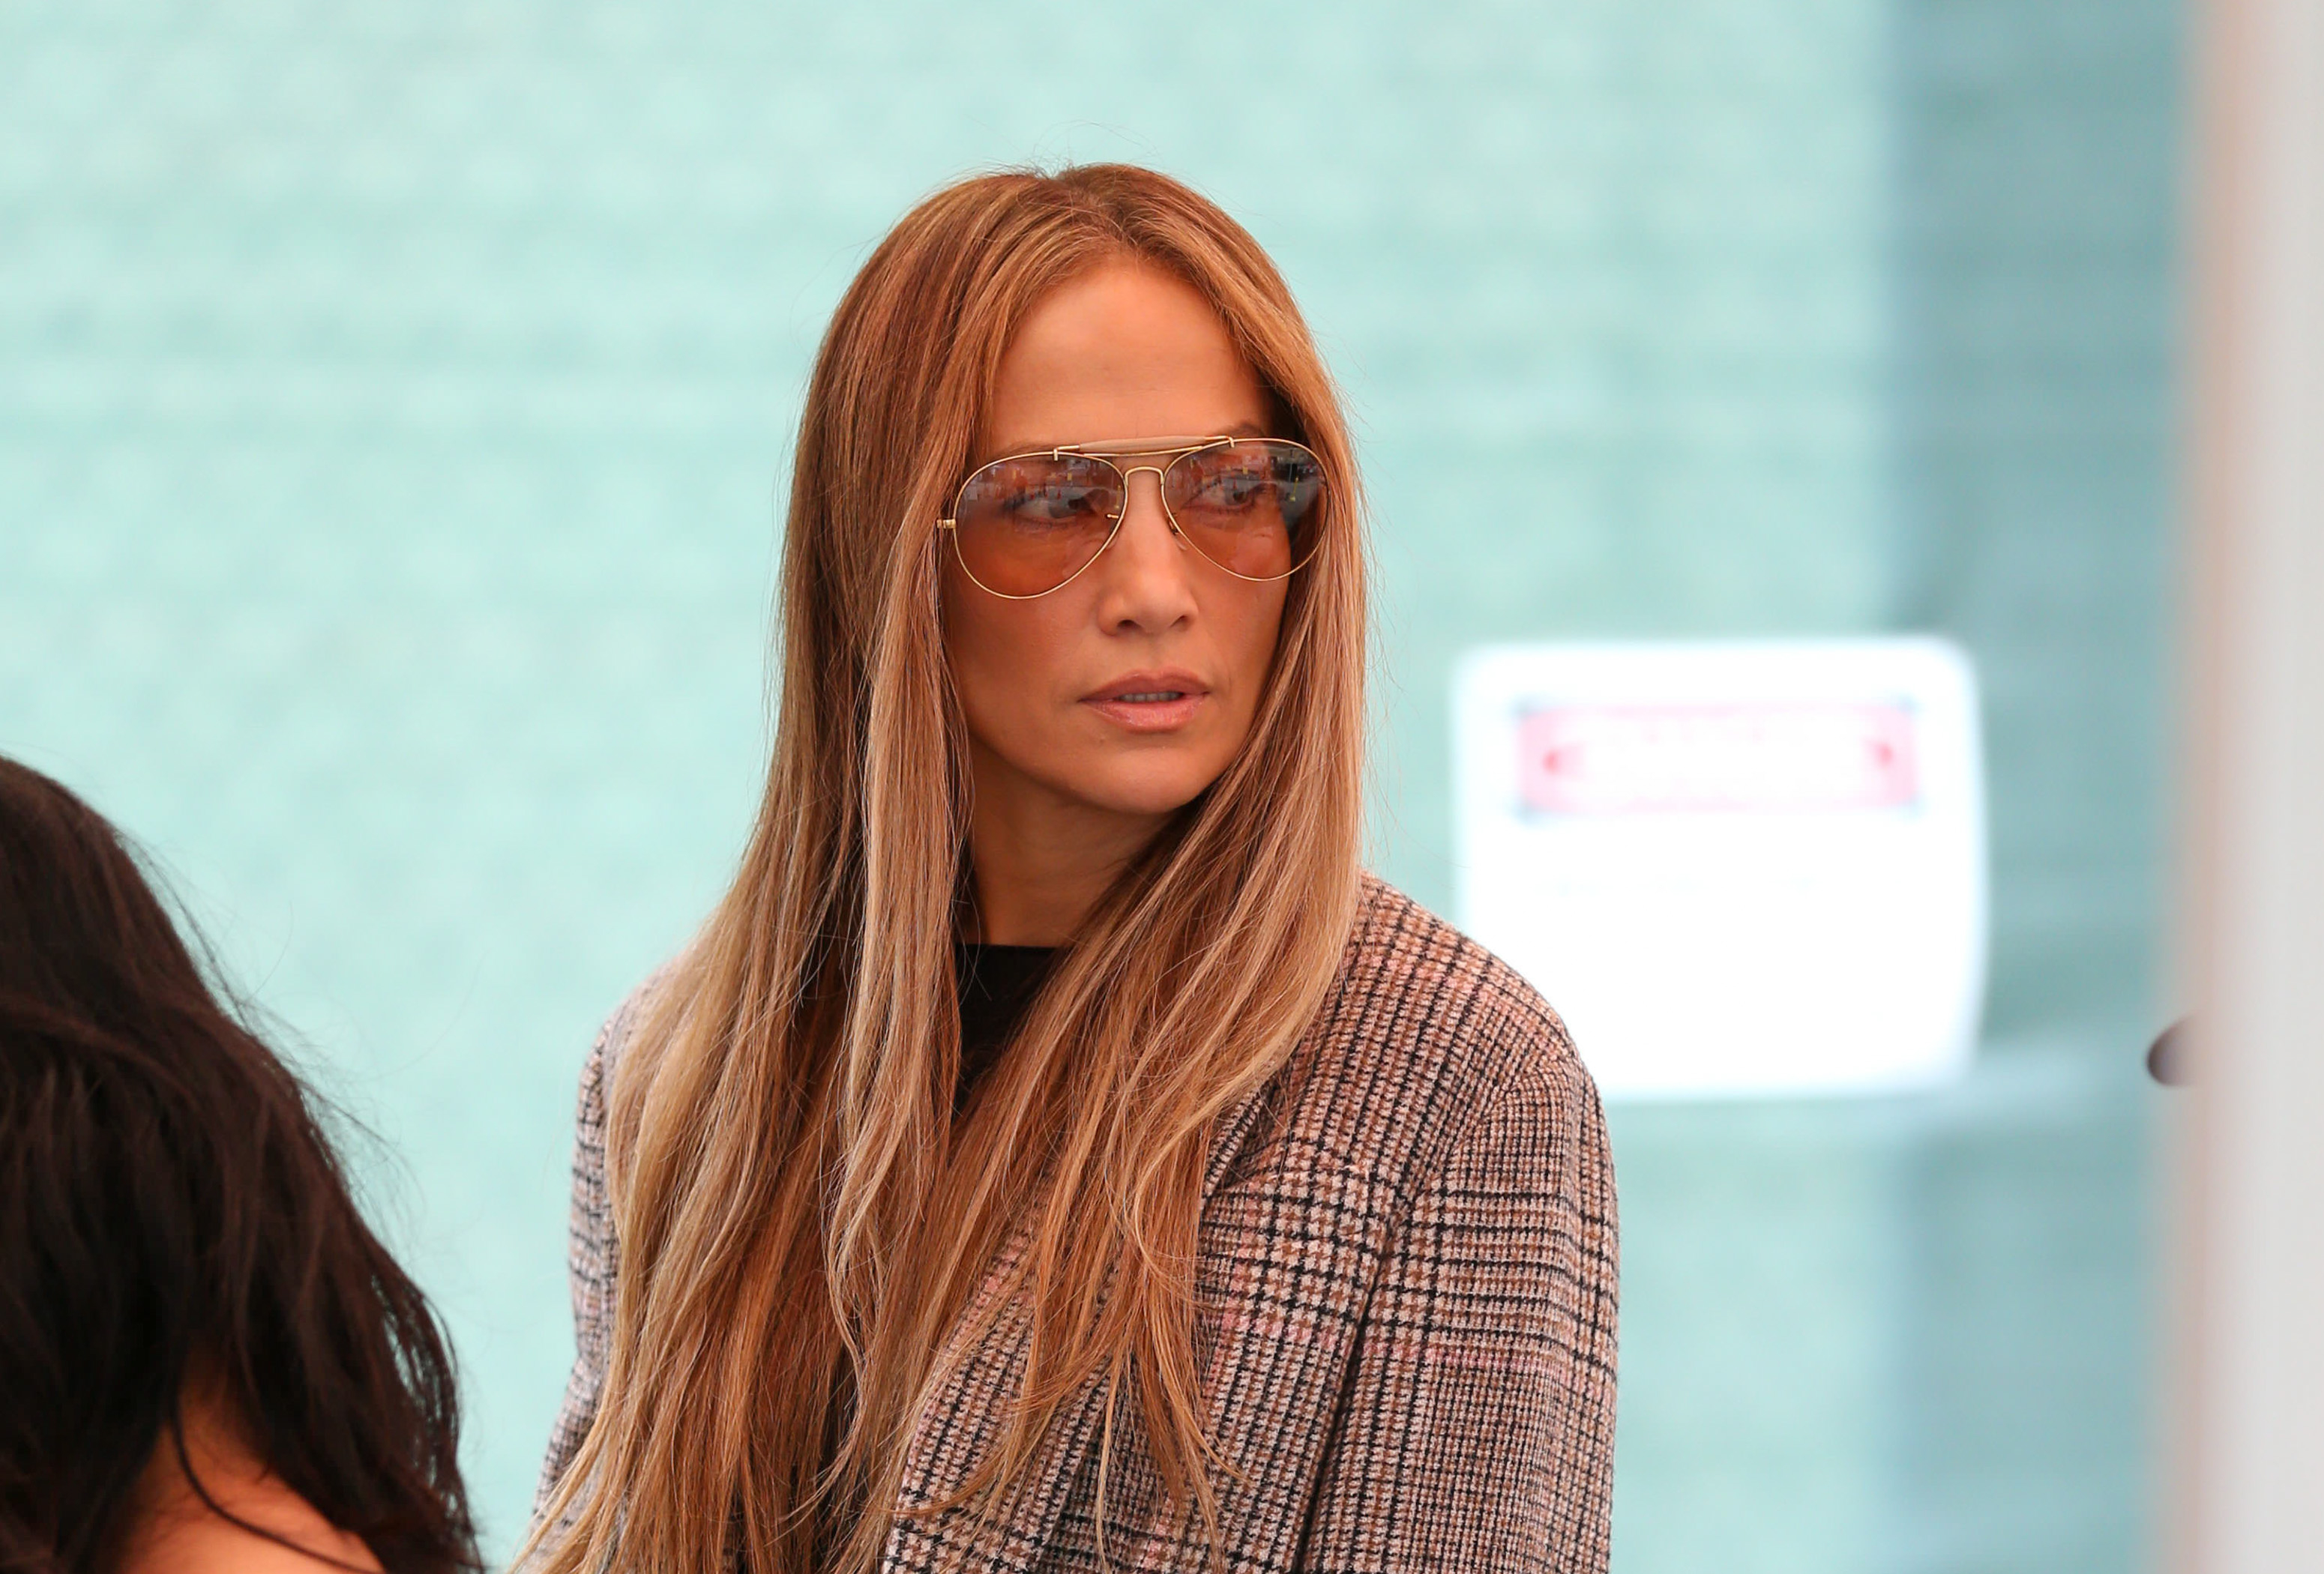 Jennifer Lopez wearing a stylish blazer and aviator sunglasses, looking to the side at an outdoor event